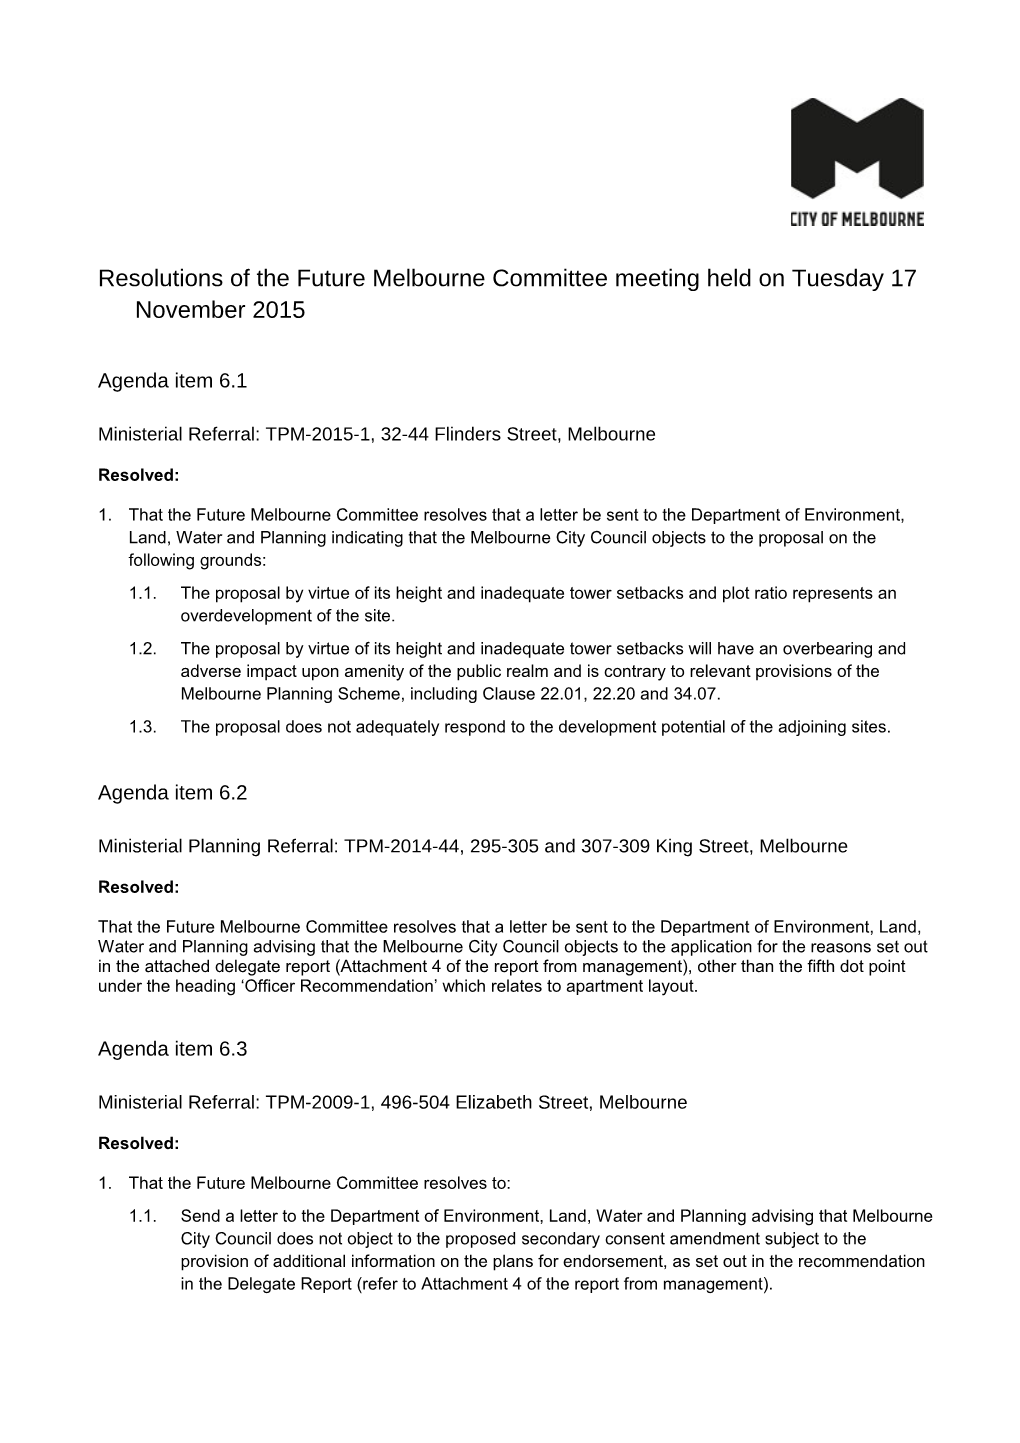 Resolutions of the Future Melbourne Committee Meeting Held on Tuesday 17 November 2015